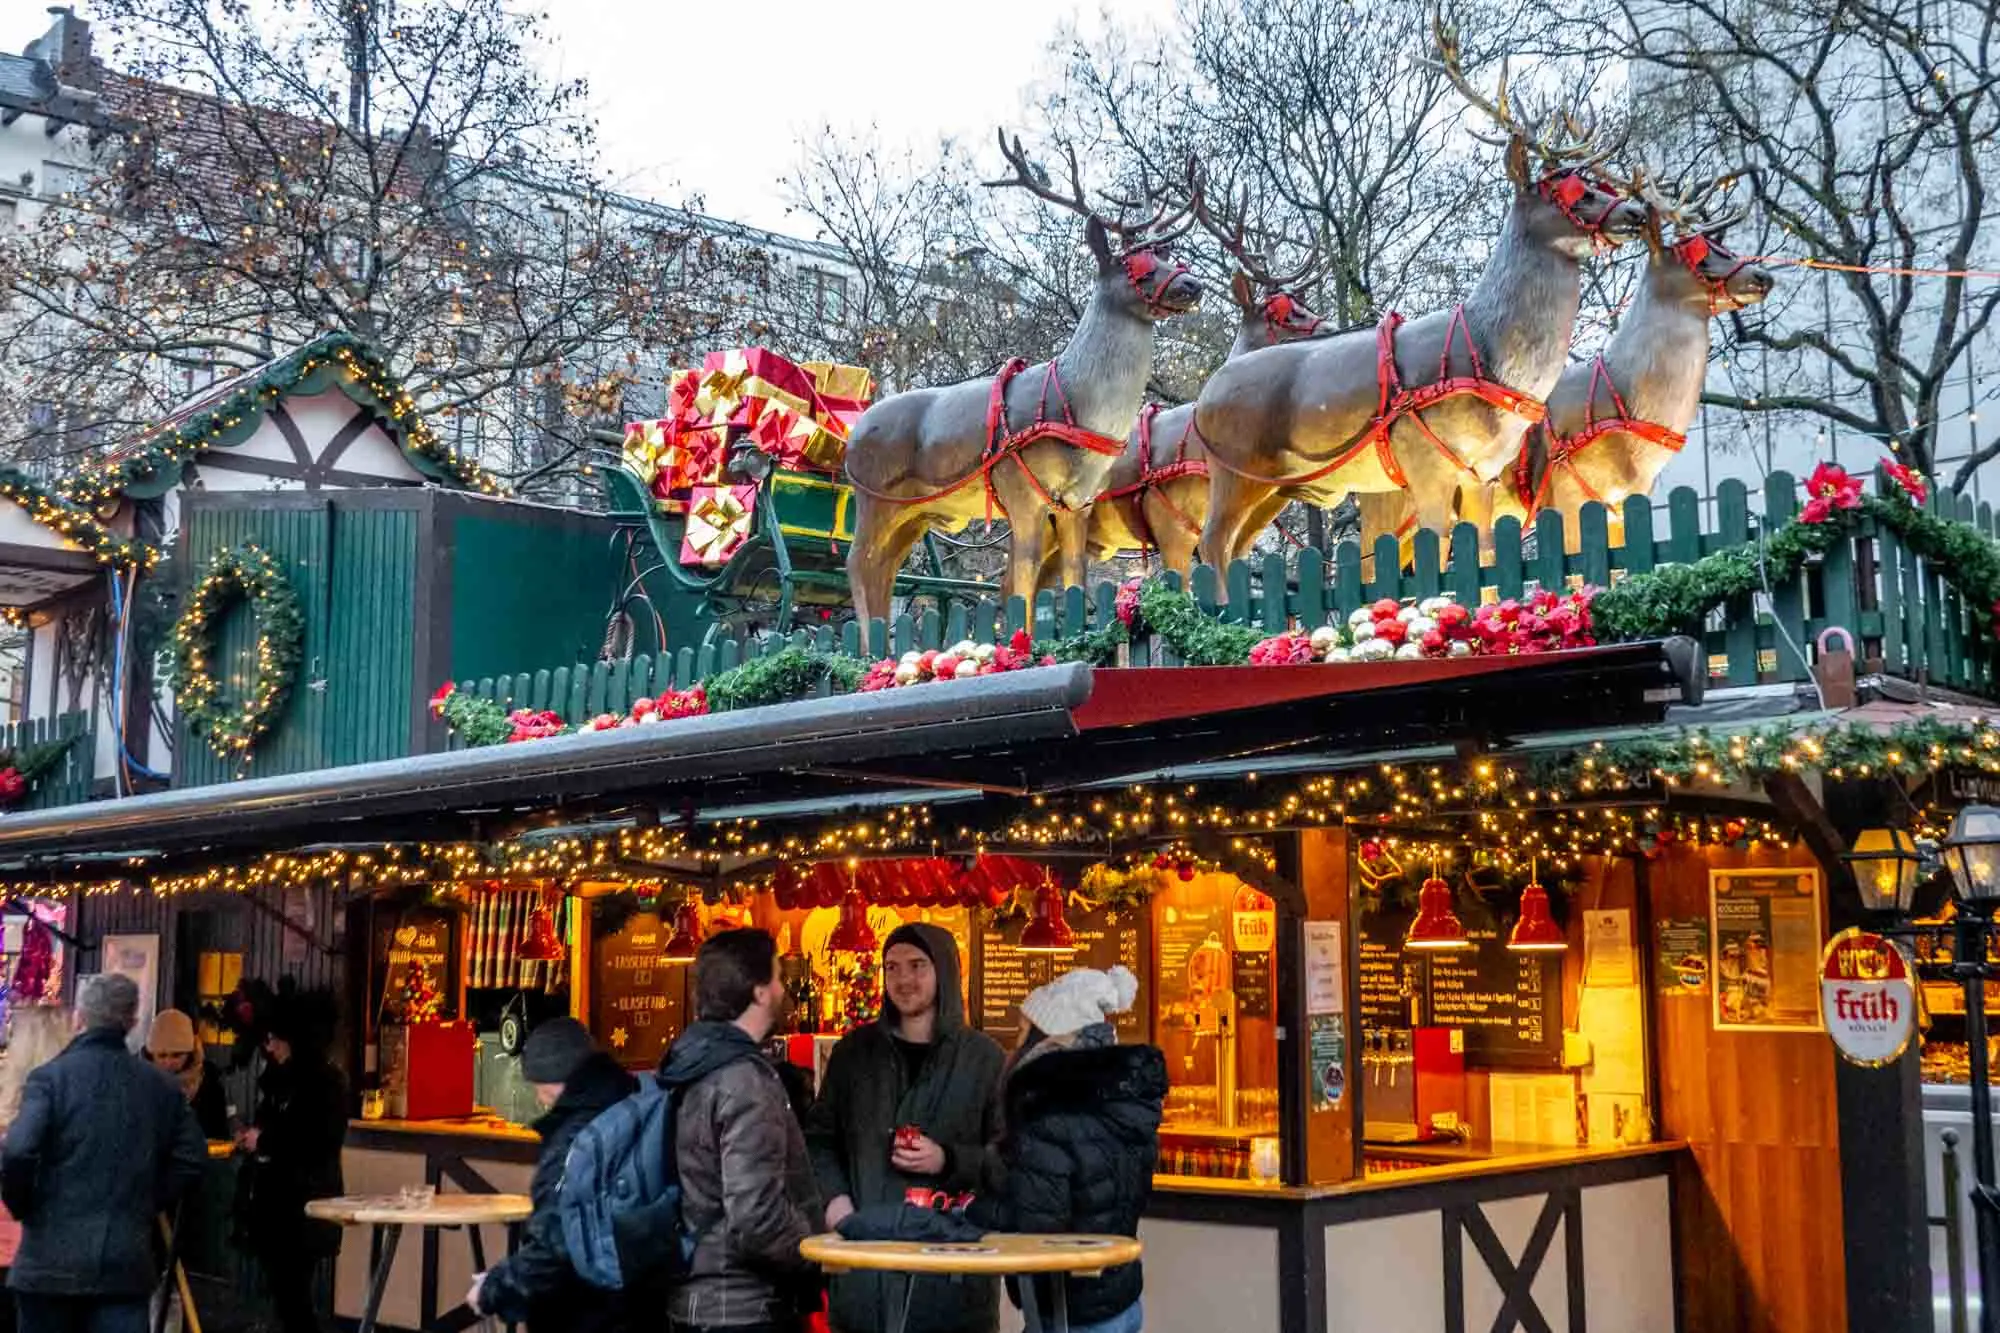 Vendor stand topped with a sleigh and reindeer